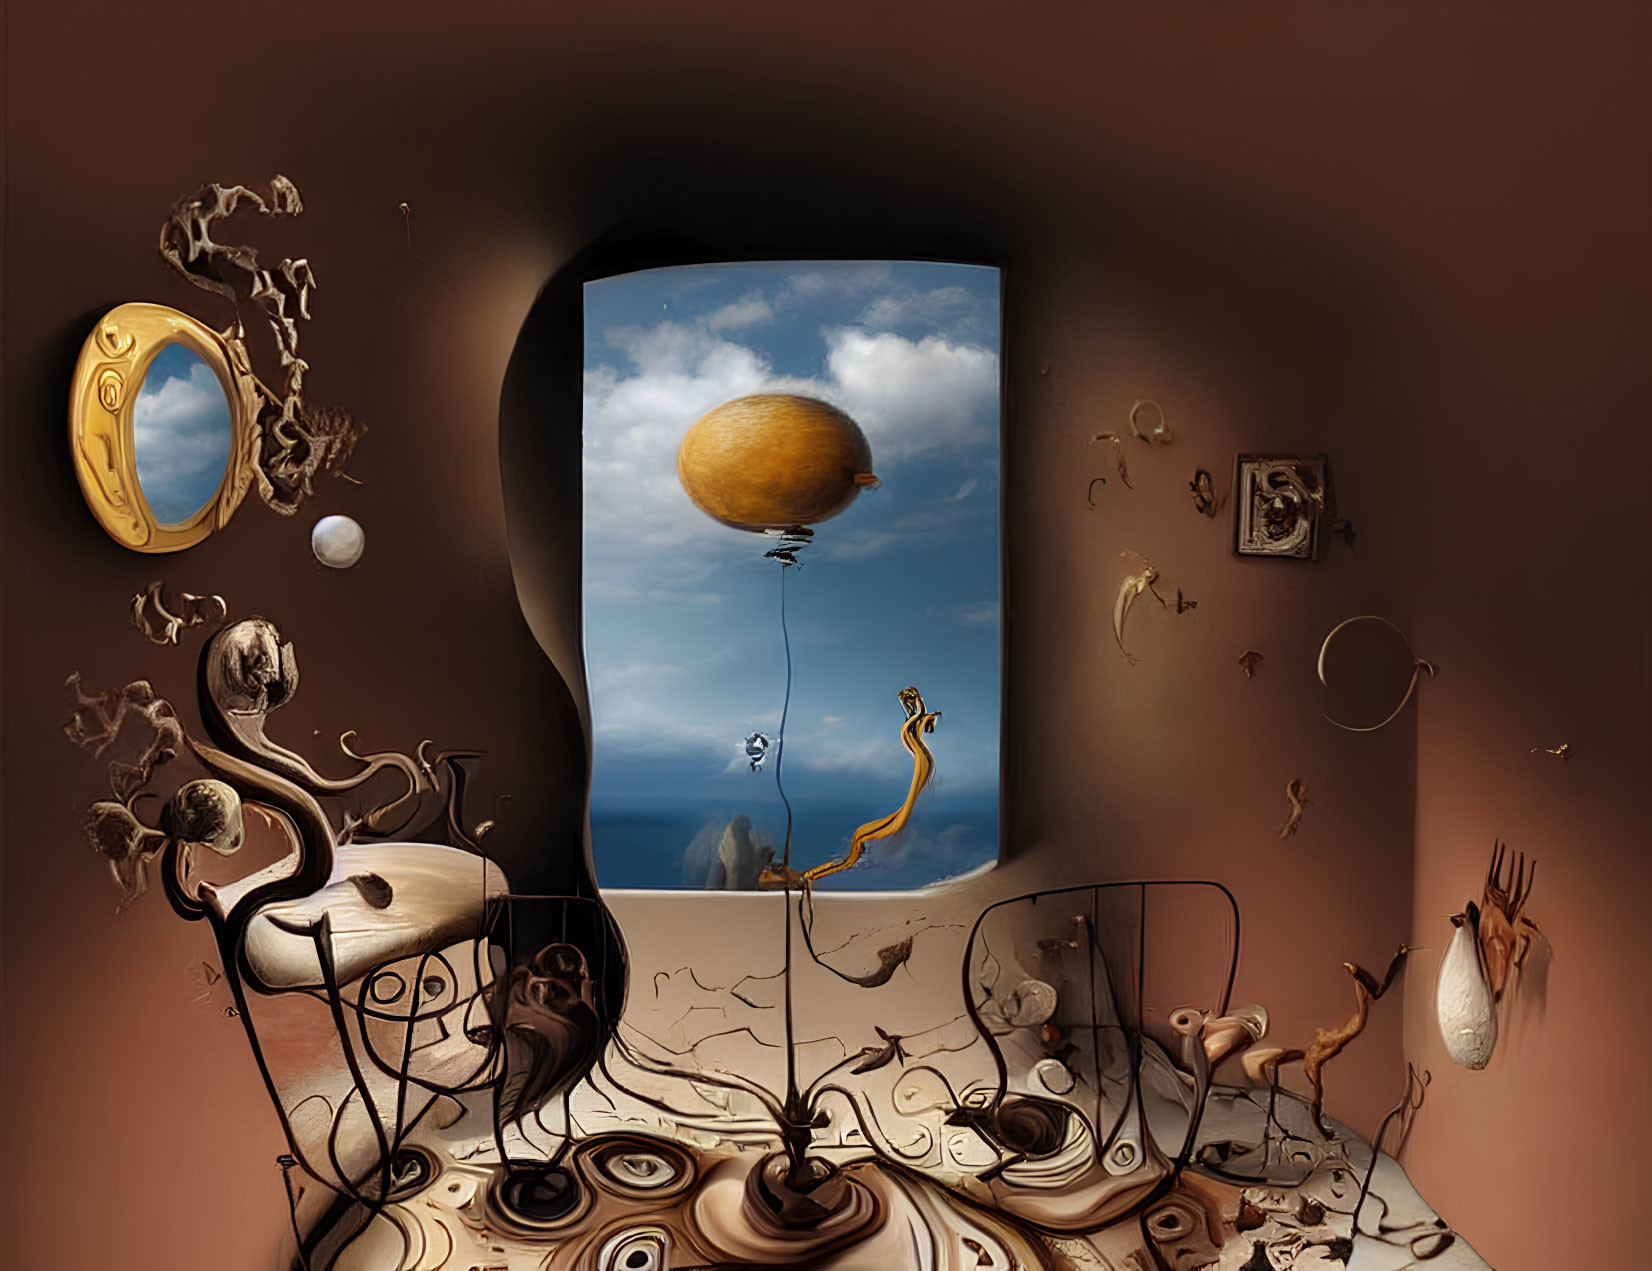 Surreal Room with Distorted Objects and Lemon Balloon Floating Outside